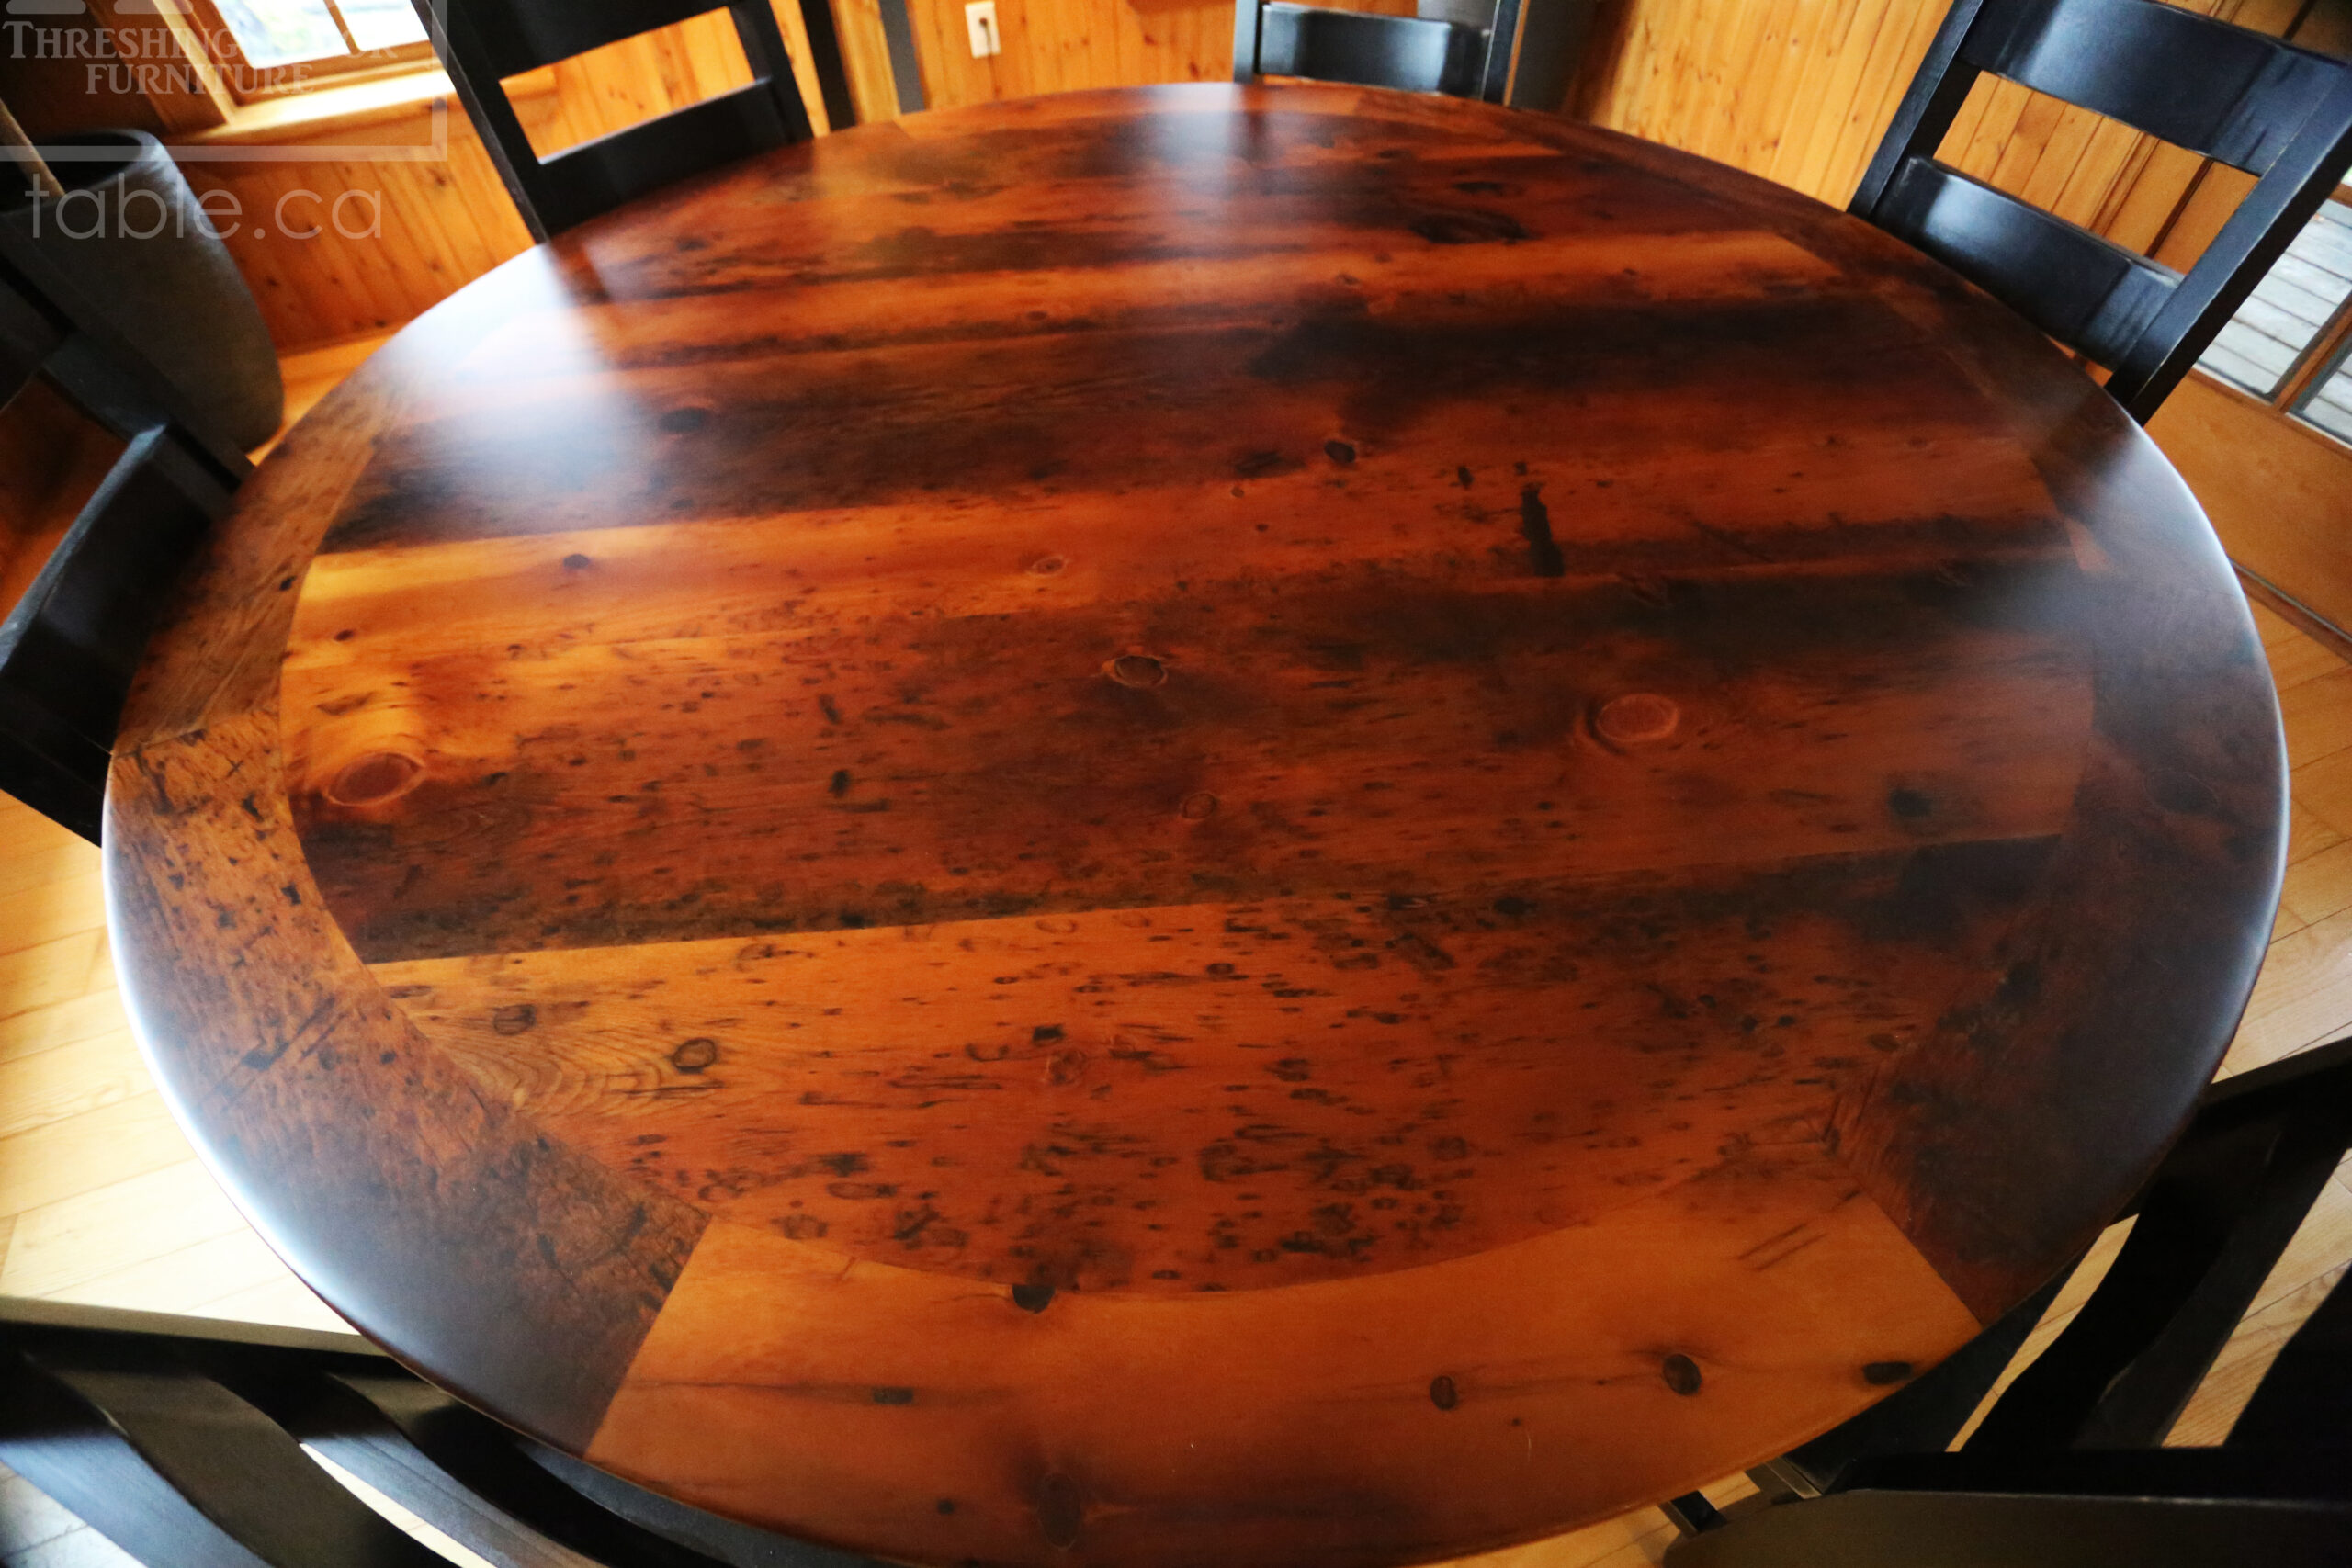 72" Round Ontario Barnwood Table we made for a Pakenham, Ontario Home - Reclaimed cedar hydro pole base - Old Growth Hemlock Threshing Floor Construction - Original Distressing & Character & Edges Maintained - Premium epoxy + matte polyurethane finish - 6 Ladder Back Chairs / Wormy Maple / Custom finished / Polyurethane clearcoat finish - www.table.ca